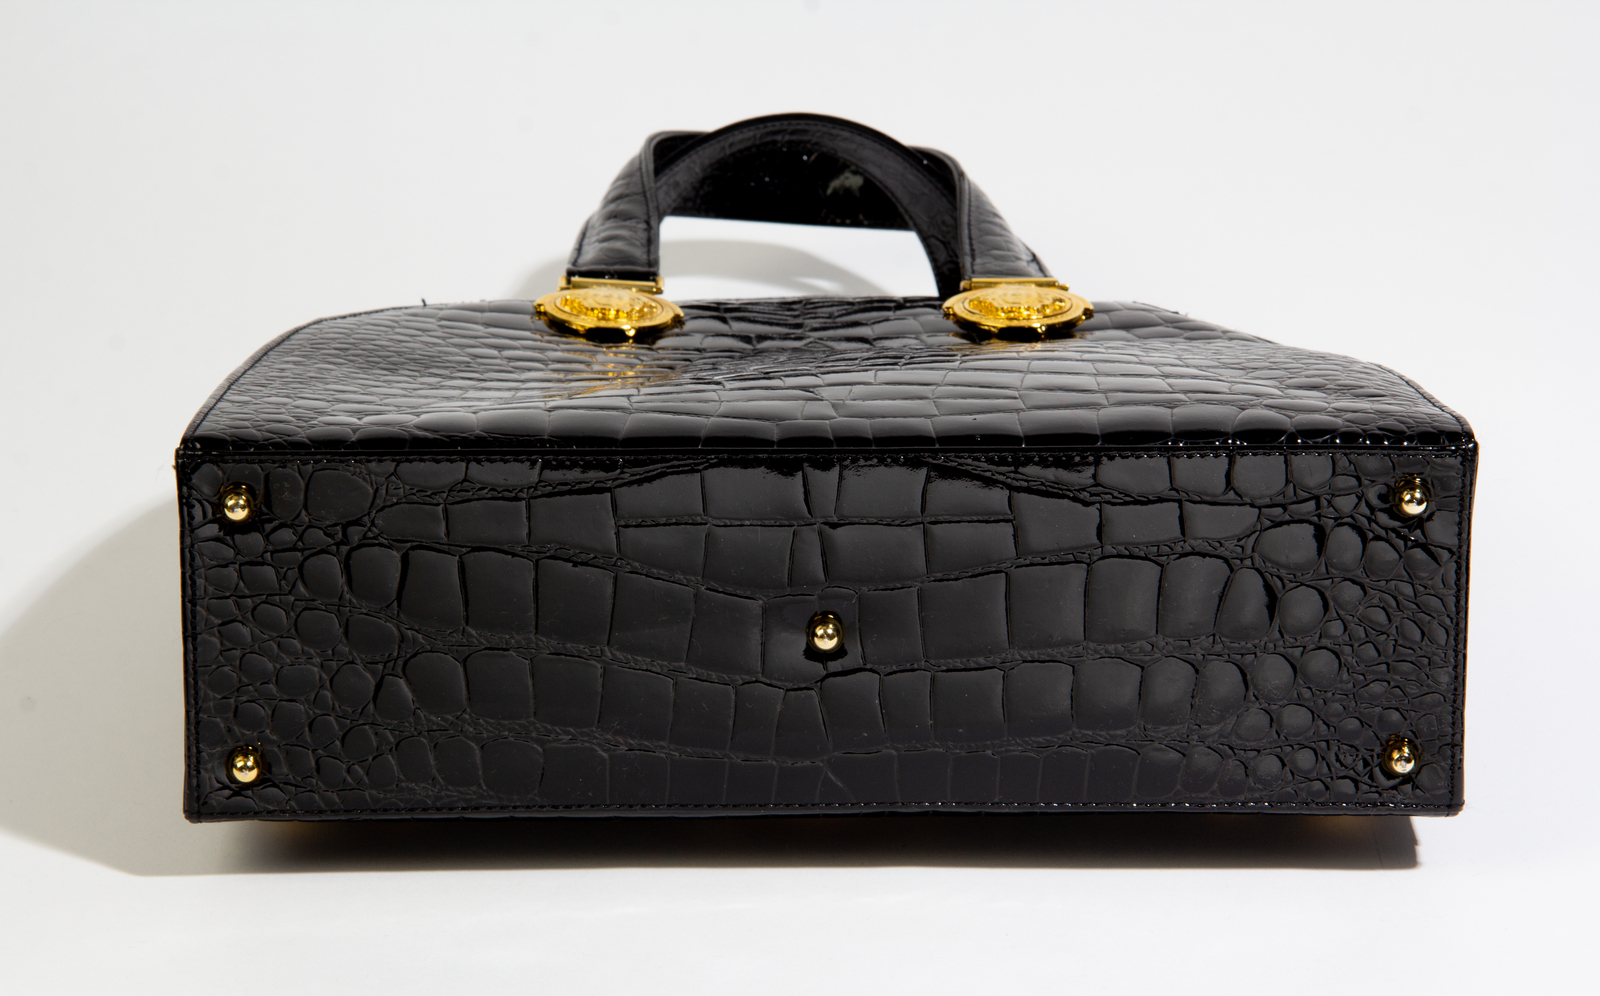 GIANNI VERSACE HANDBAG, black fabric with patent leather trims and top  handles, with top zip closure, lock and keys, bottom feet, iconic Medusa  logo at the front, black fabric lining, with dust